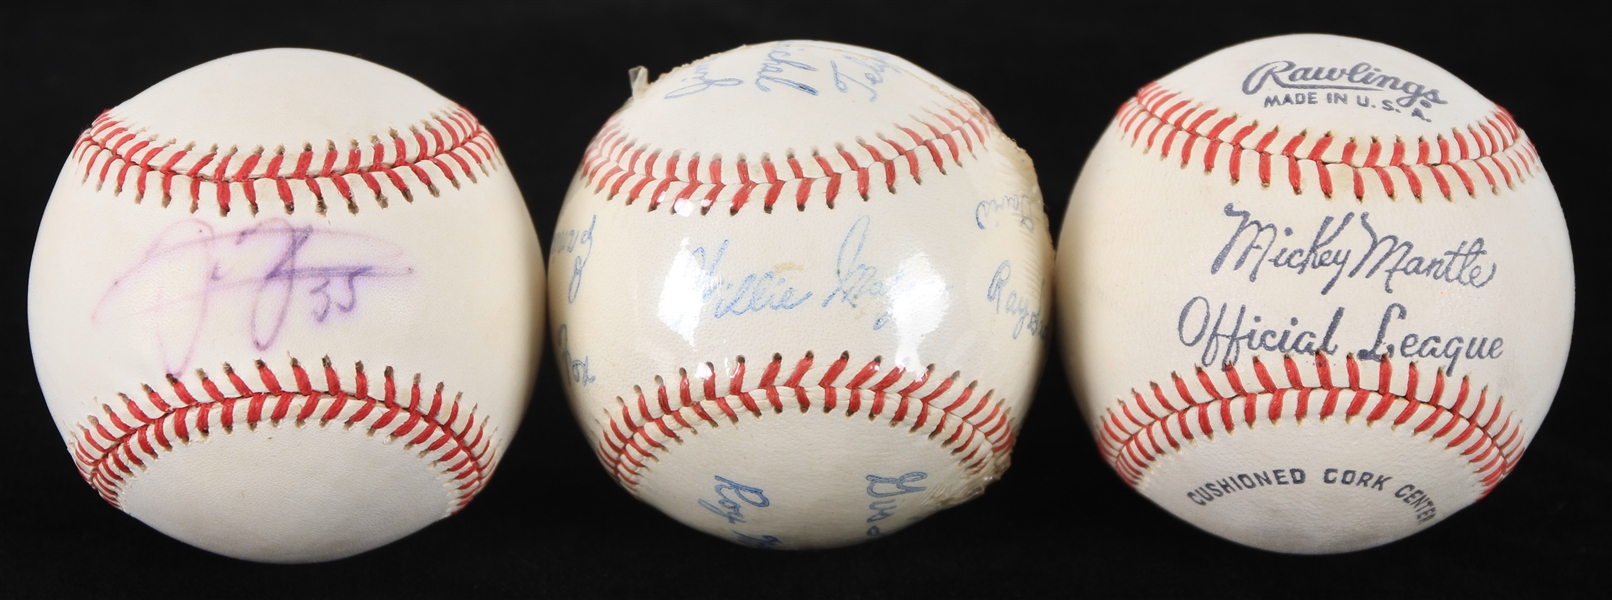 1960s-90s Baseball Collection - Lot of 3 w/ Frank Thomas Signed OAL Budig, Mickey Mantle Official League Ball & Facsimile Stamped Gillette League Ball